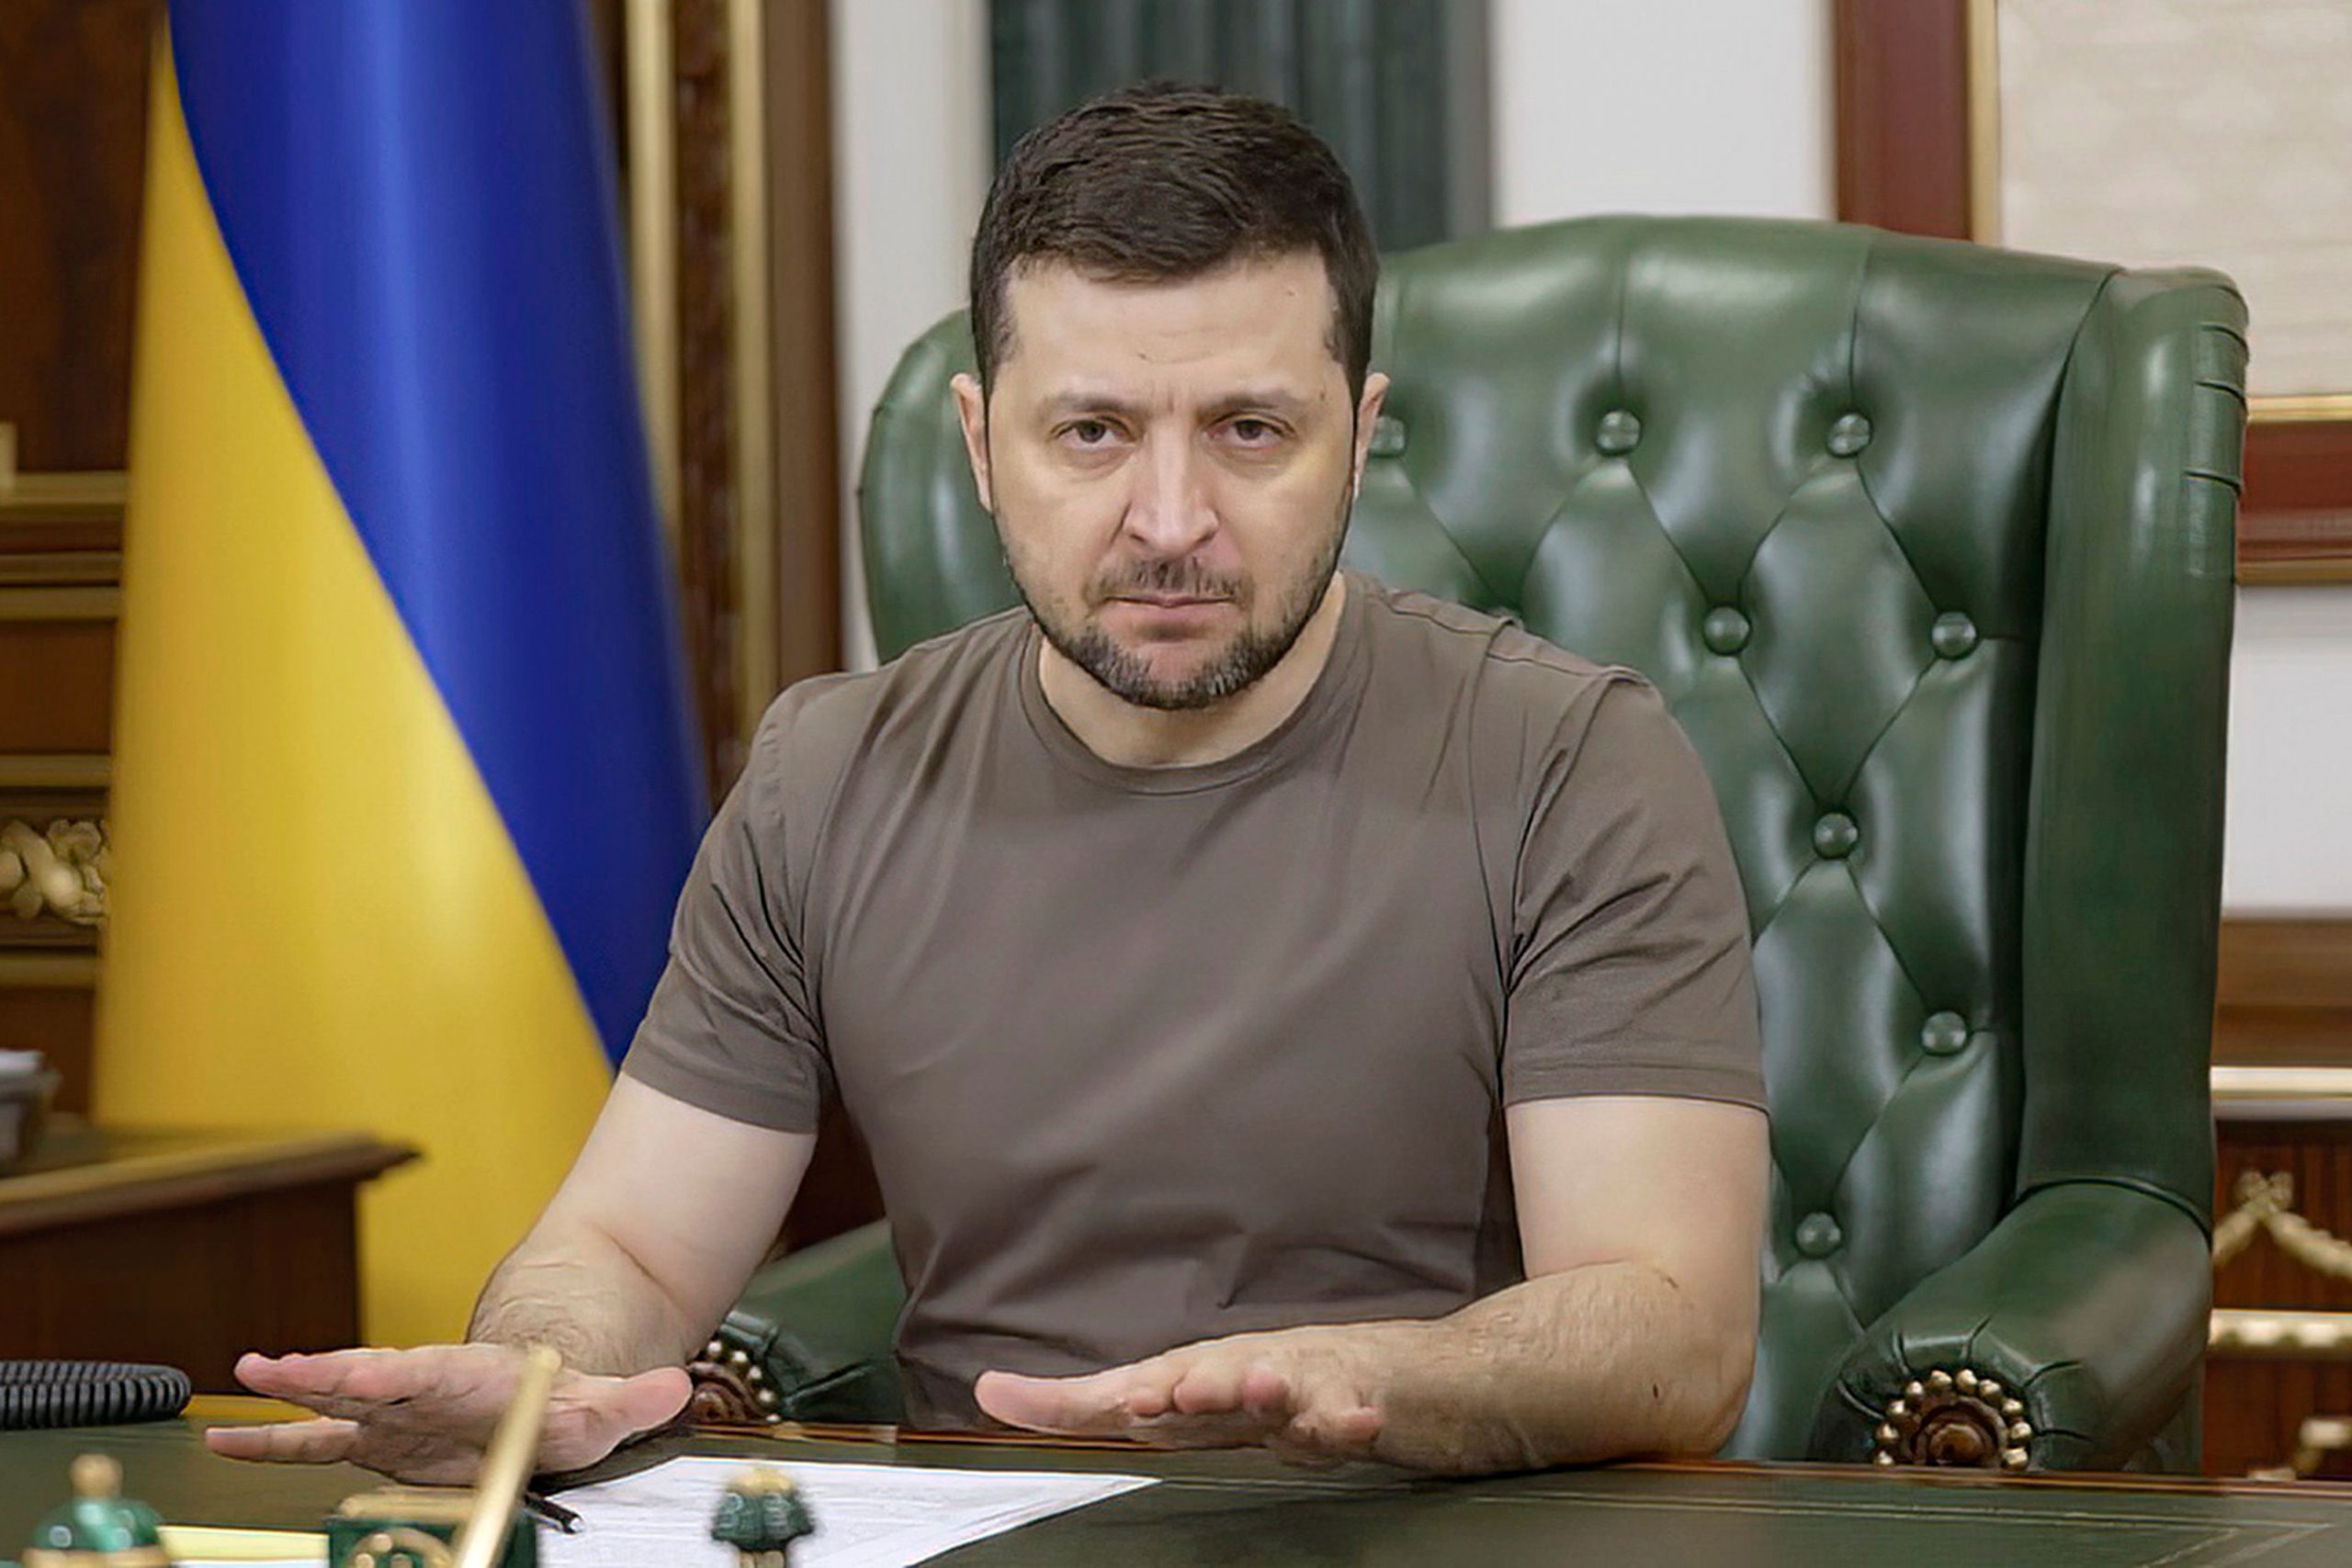 Zelensky on Victory Day, evils of war: Never again? Tell Ukraine about it